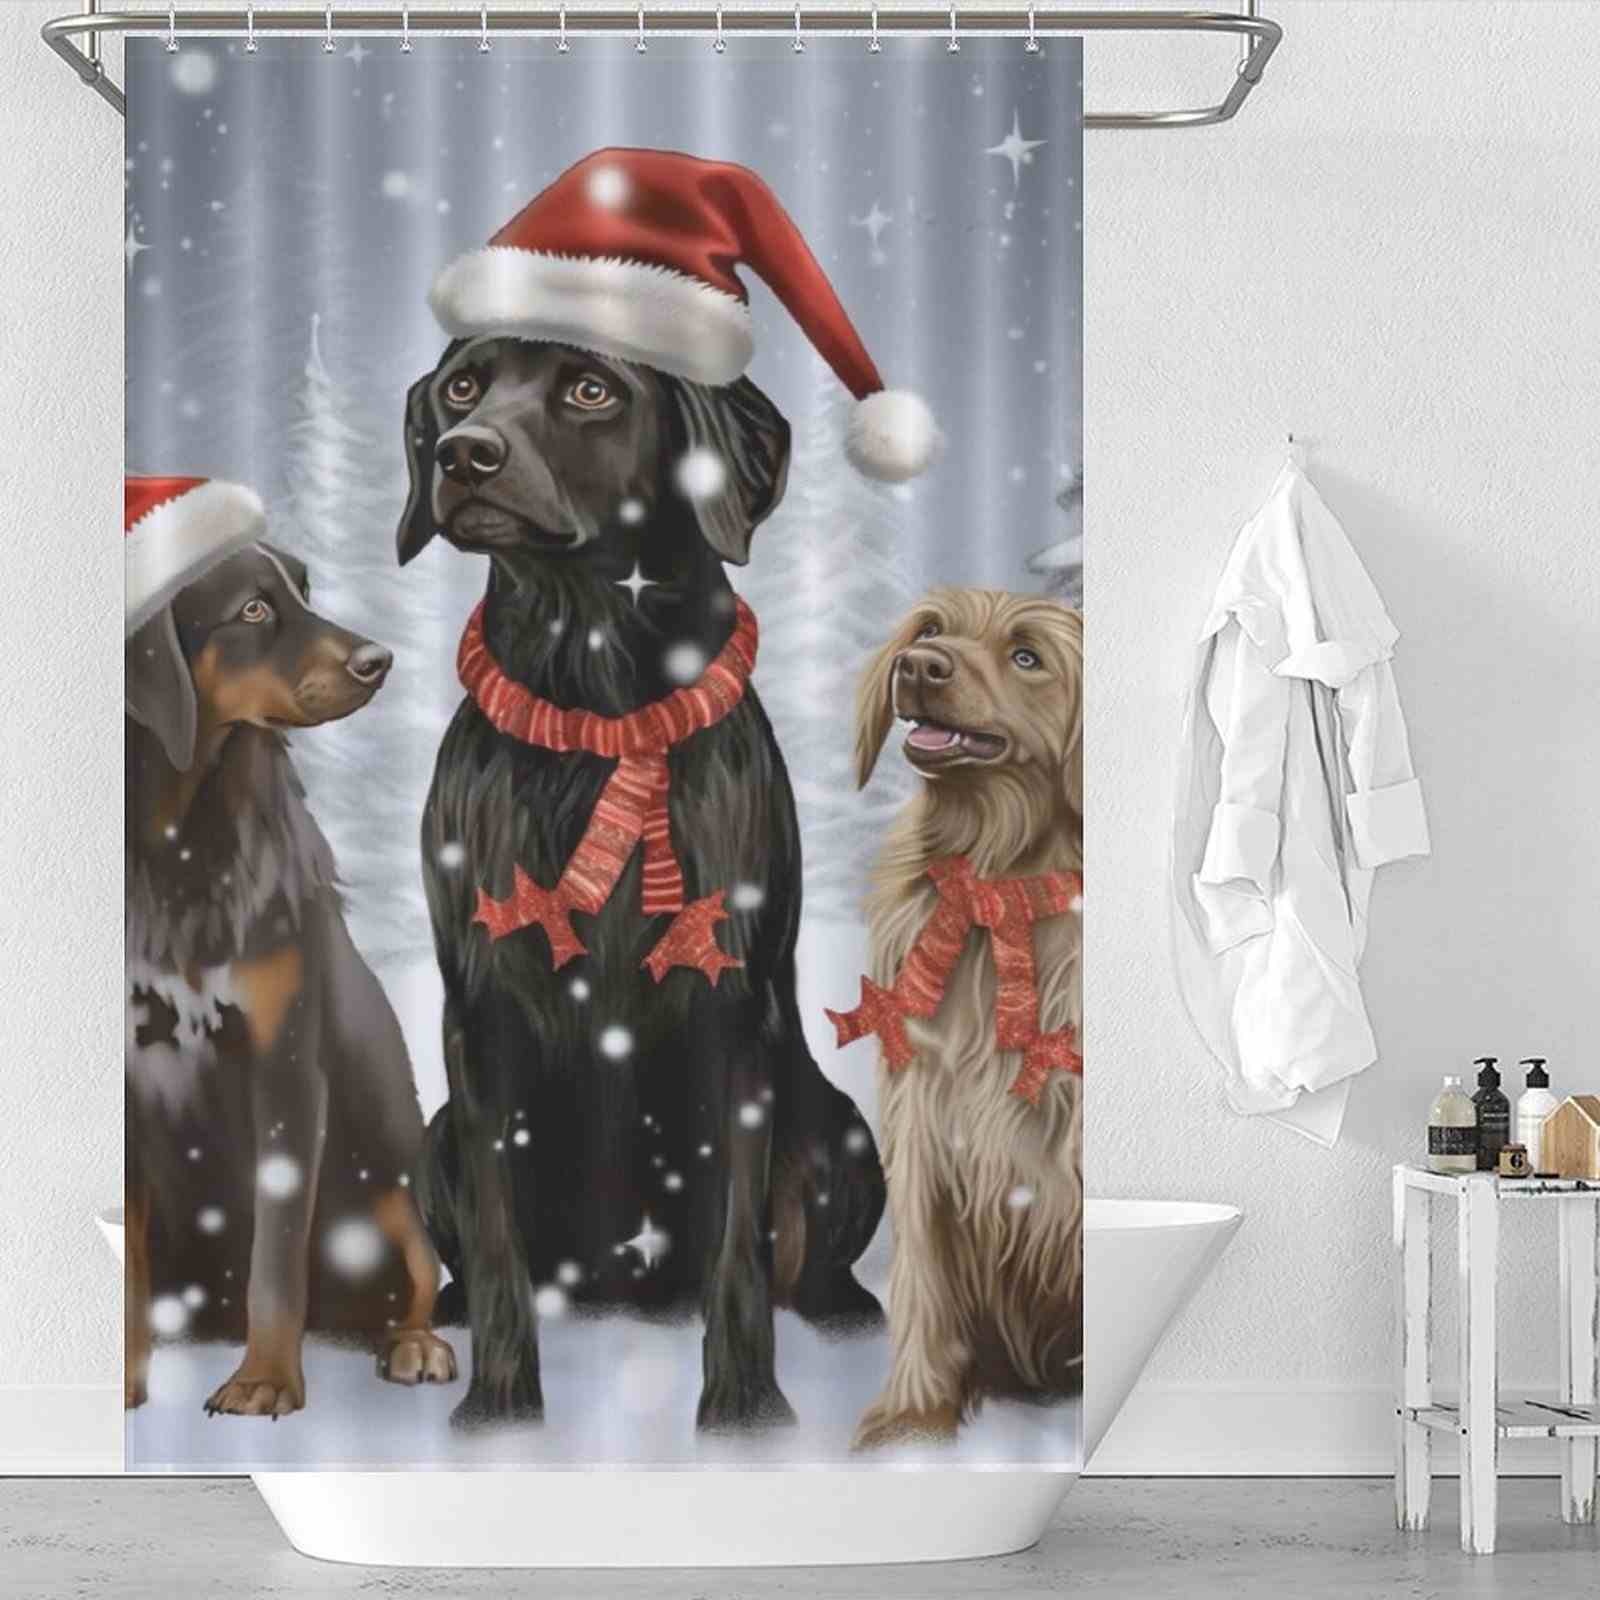 How to decorate your bathroom for christmas?three black labrador dogs in santa hats shower curtain is a good choice